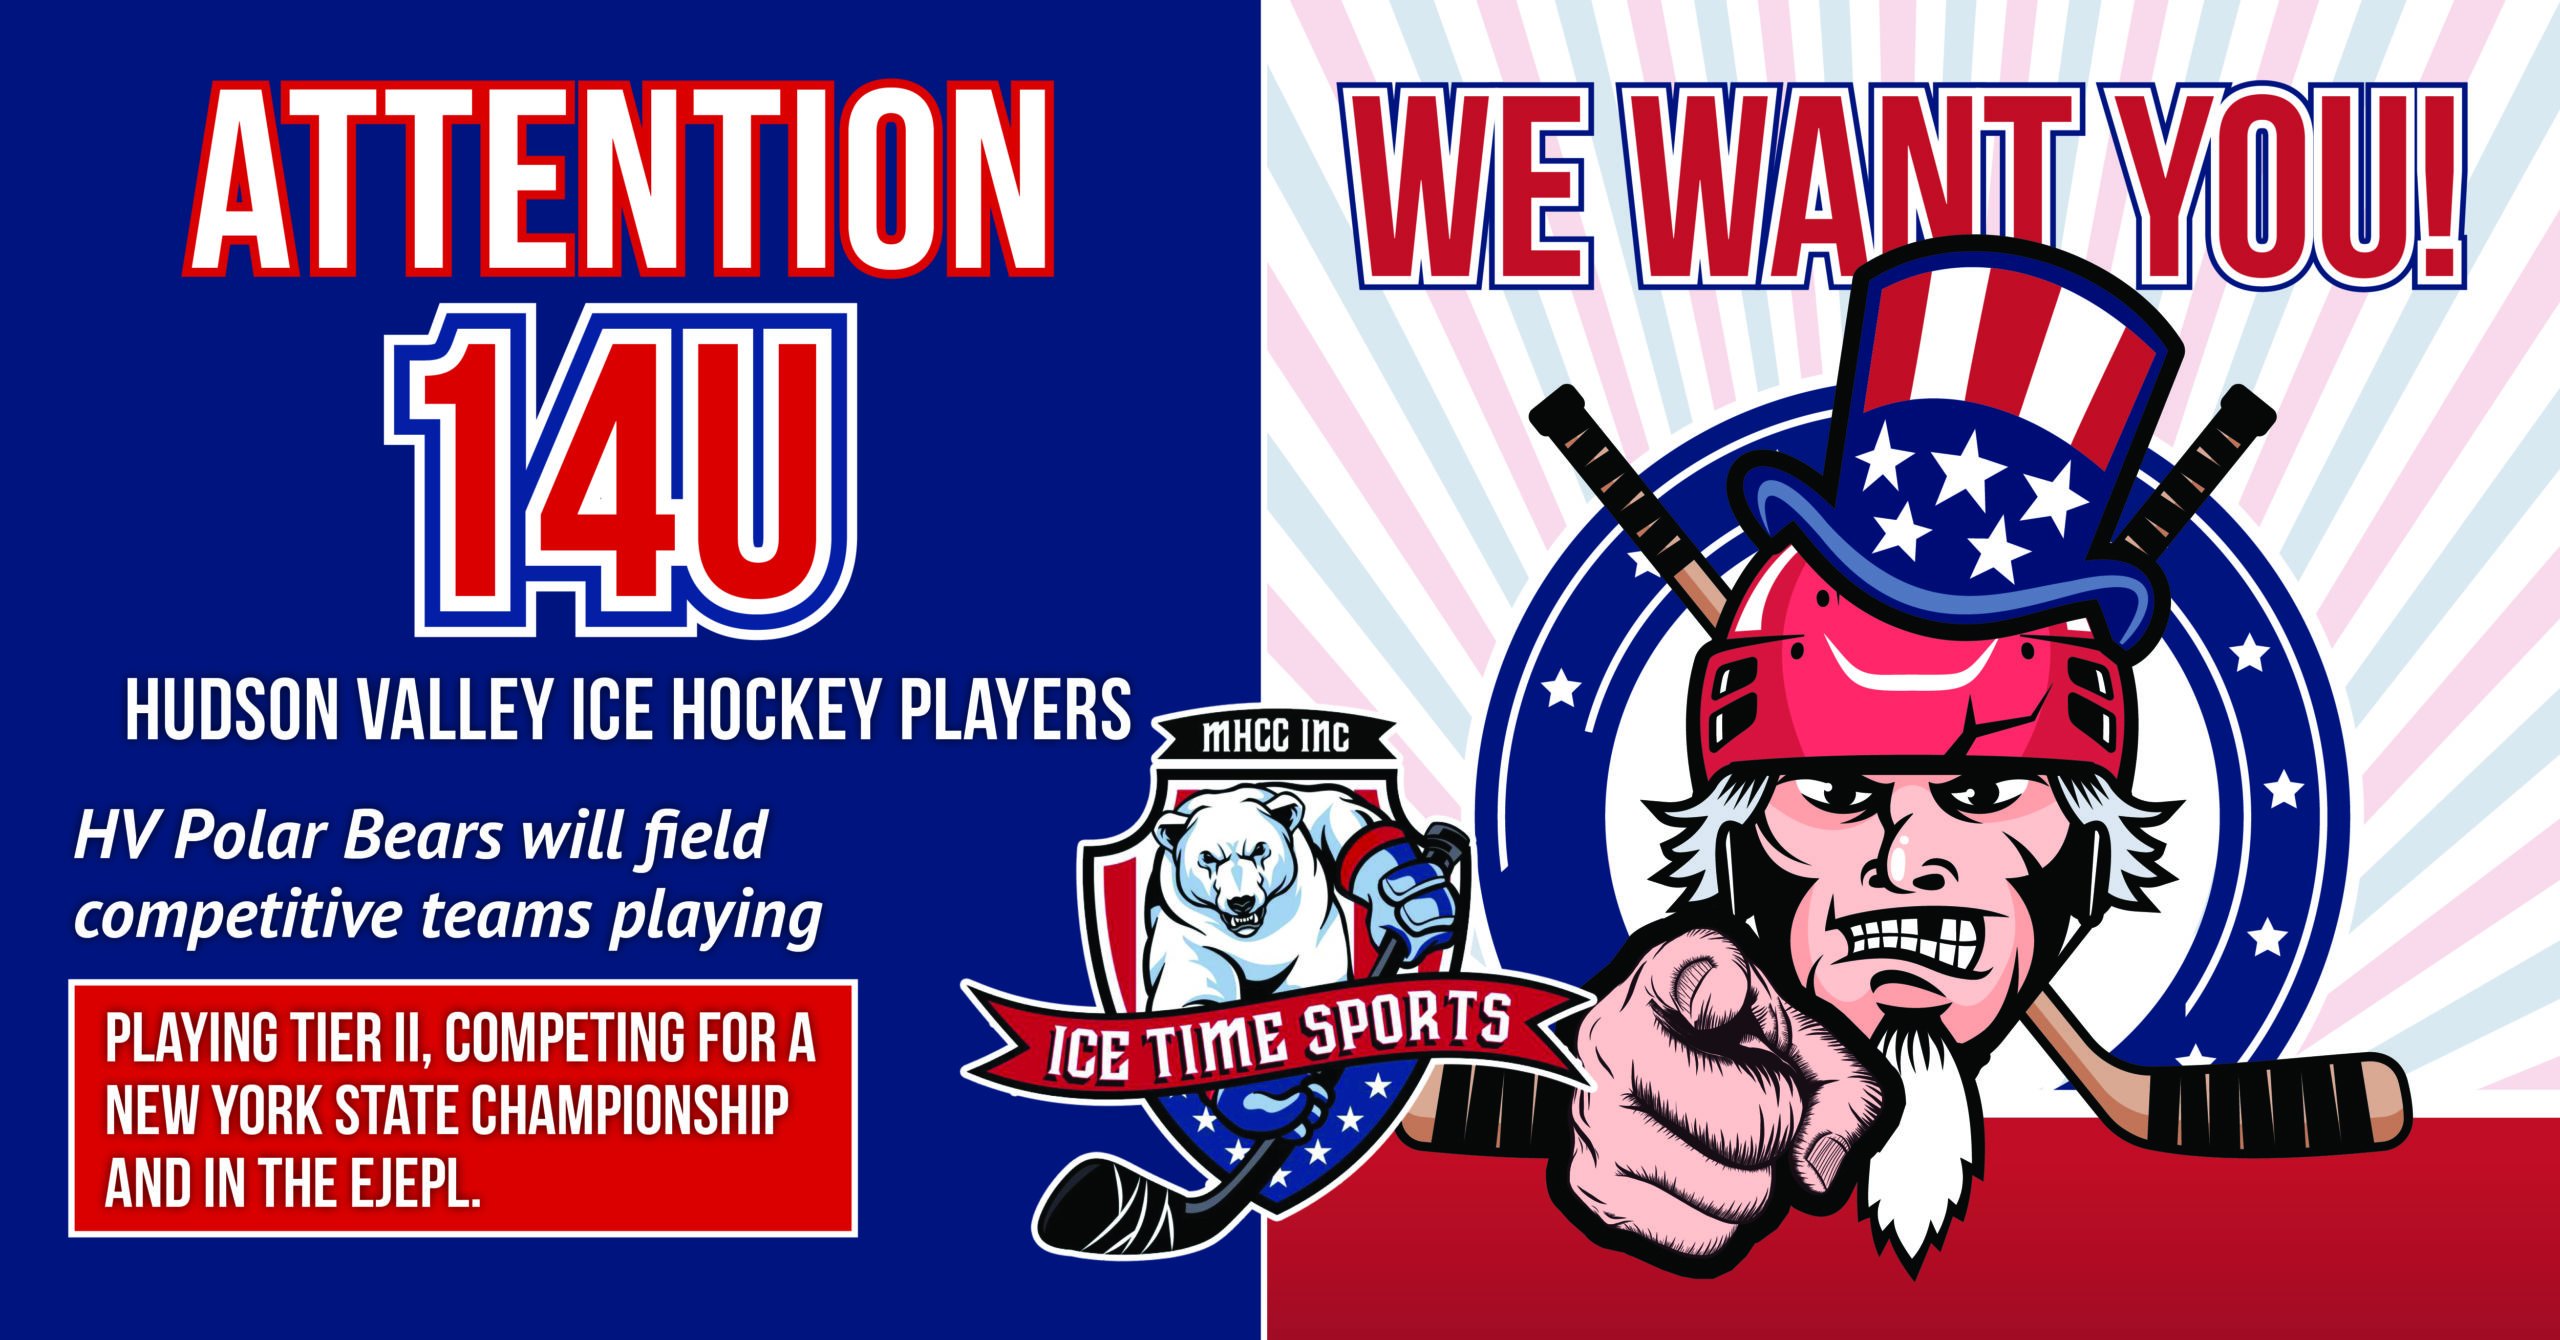 Attention 14U Hudson Valley Ice Hockey Players – WE WANT YOU!